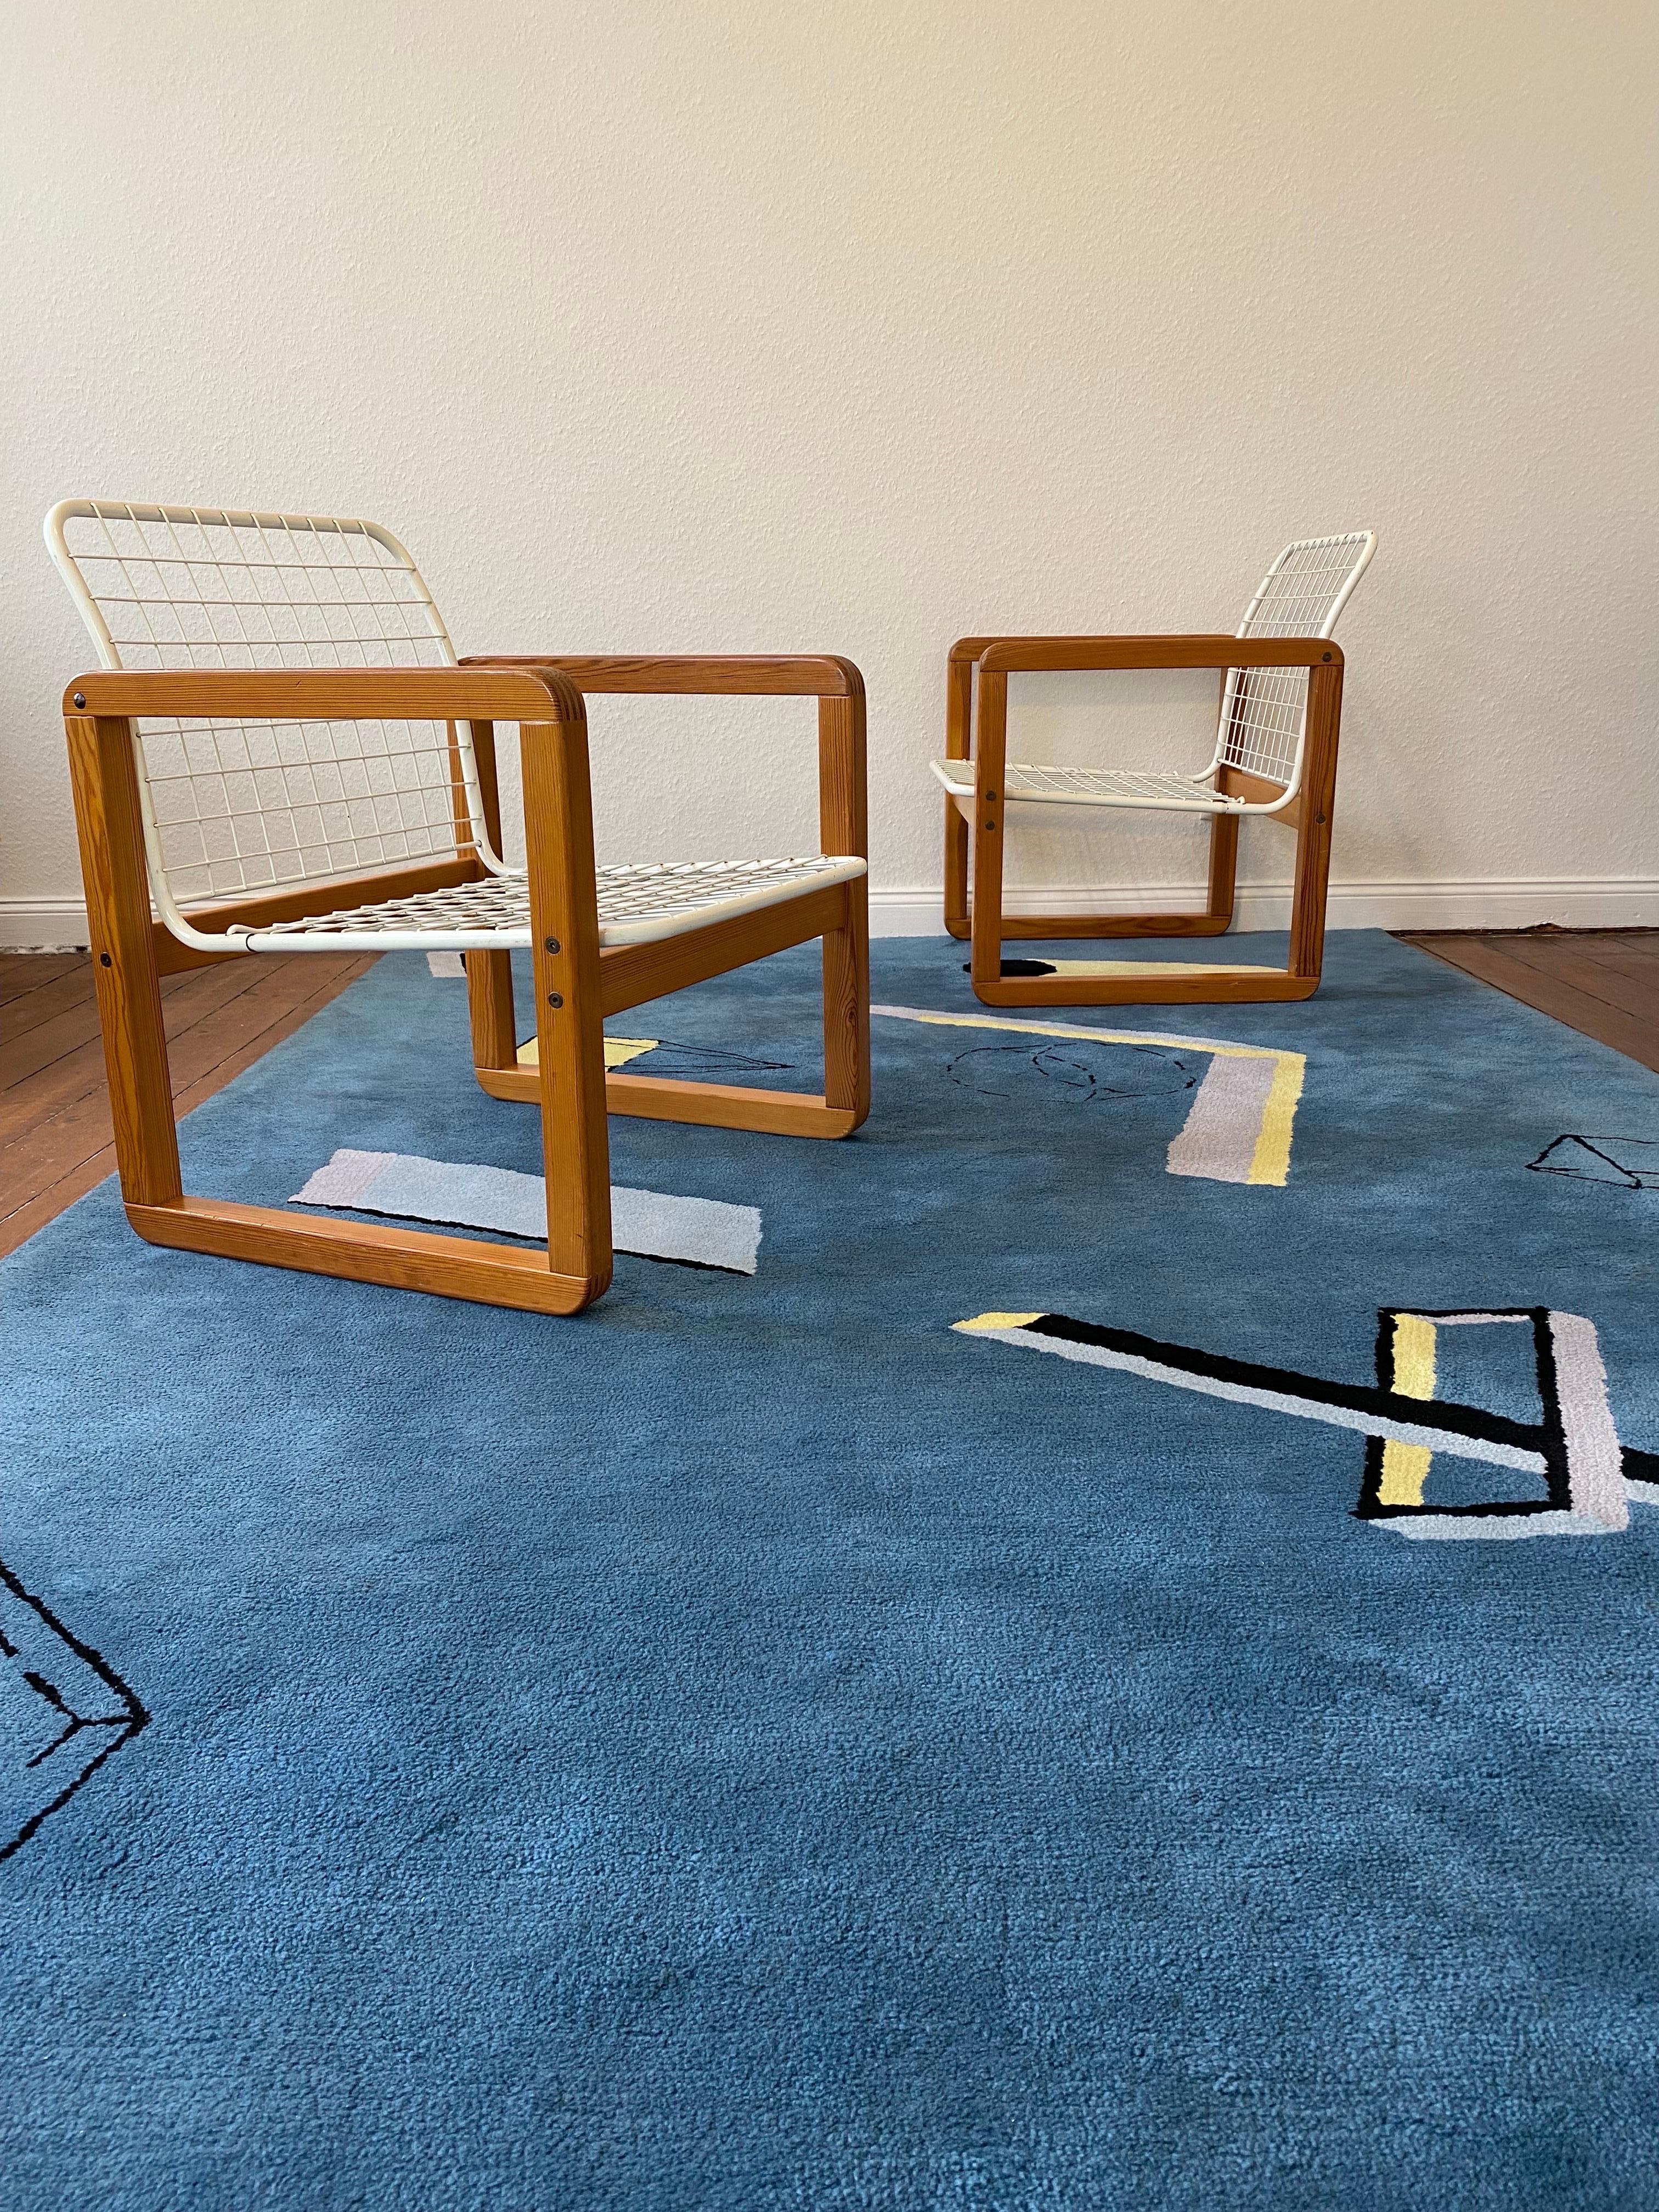 A Pair of  Postmodern Ikea  Chairs , model : SÄLEN ,designed by K.&M. Hagberg , Sweden 1982.
Made of Pine Wood and Steel with the rare and often missing washable  removable inner-cushions upholstery in good original condition.
This Version , rare in